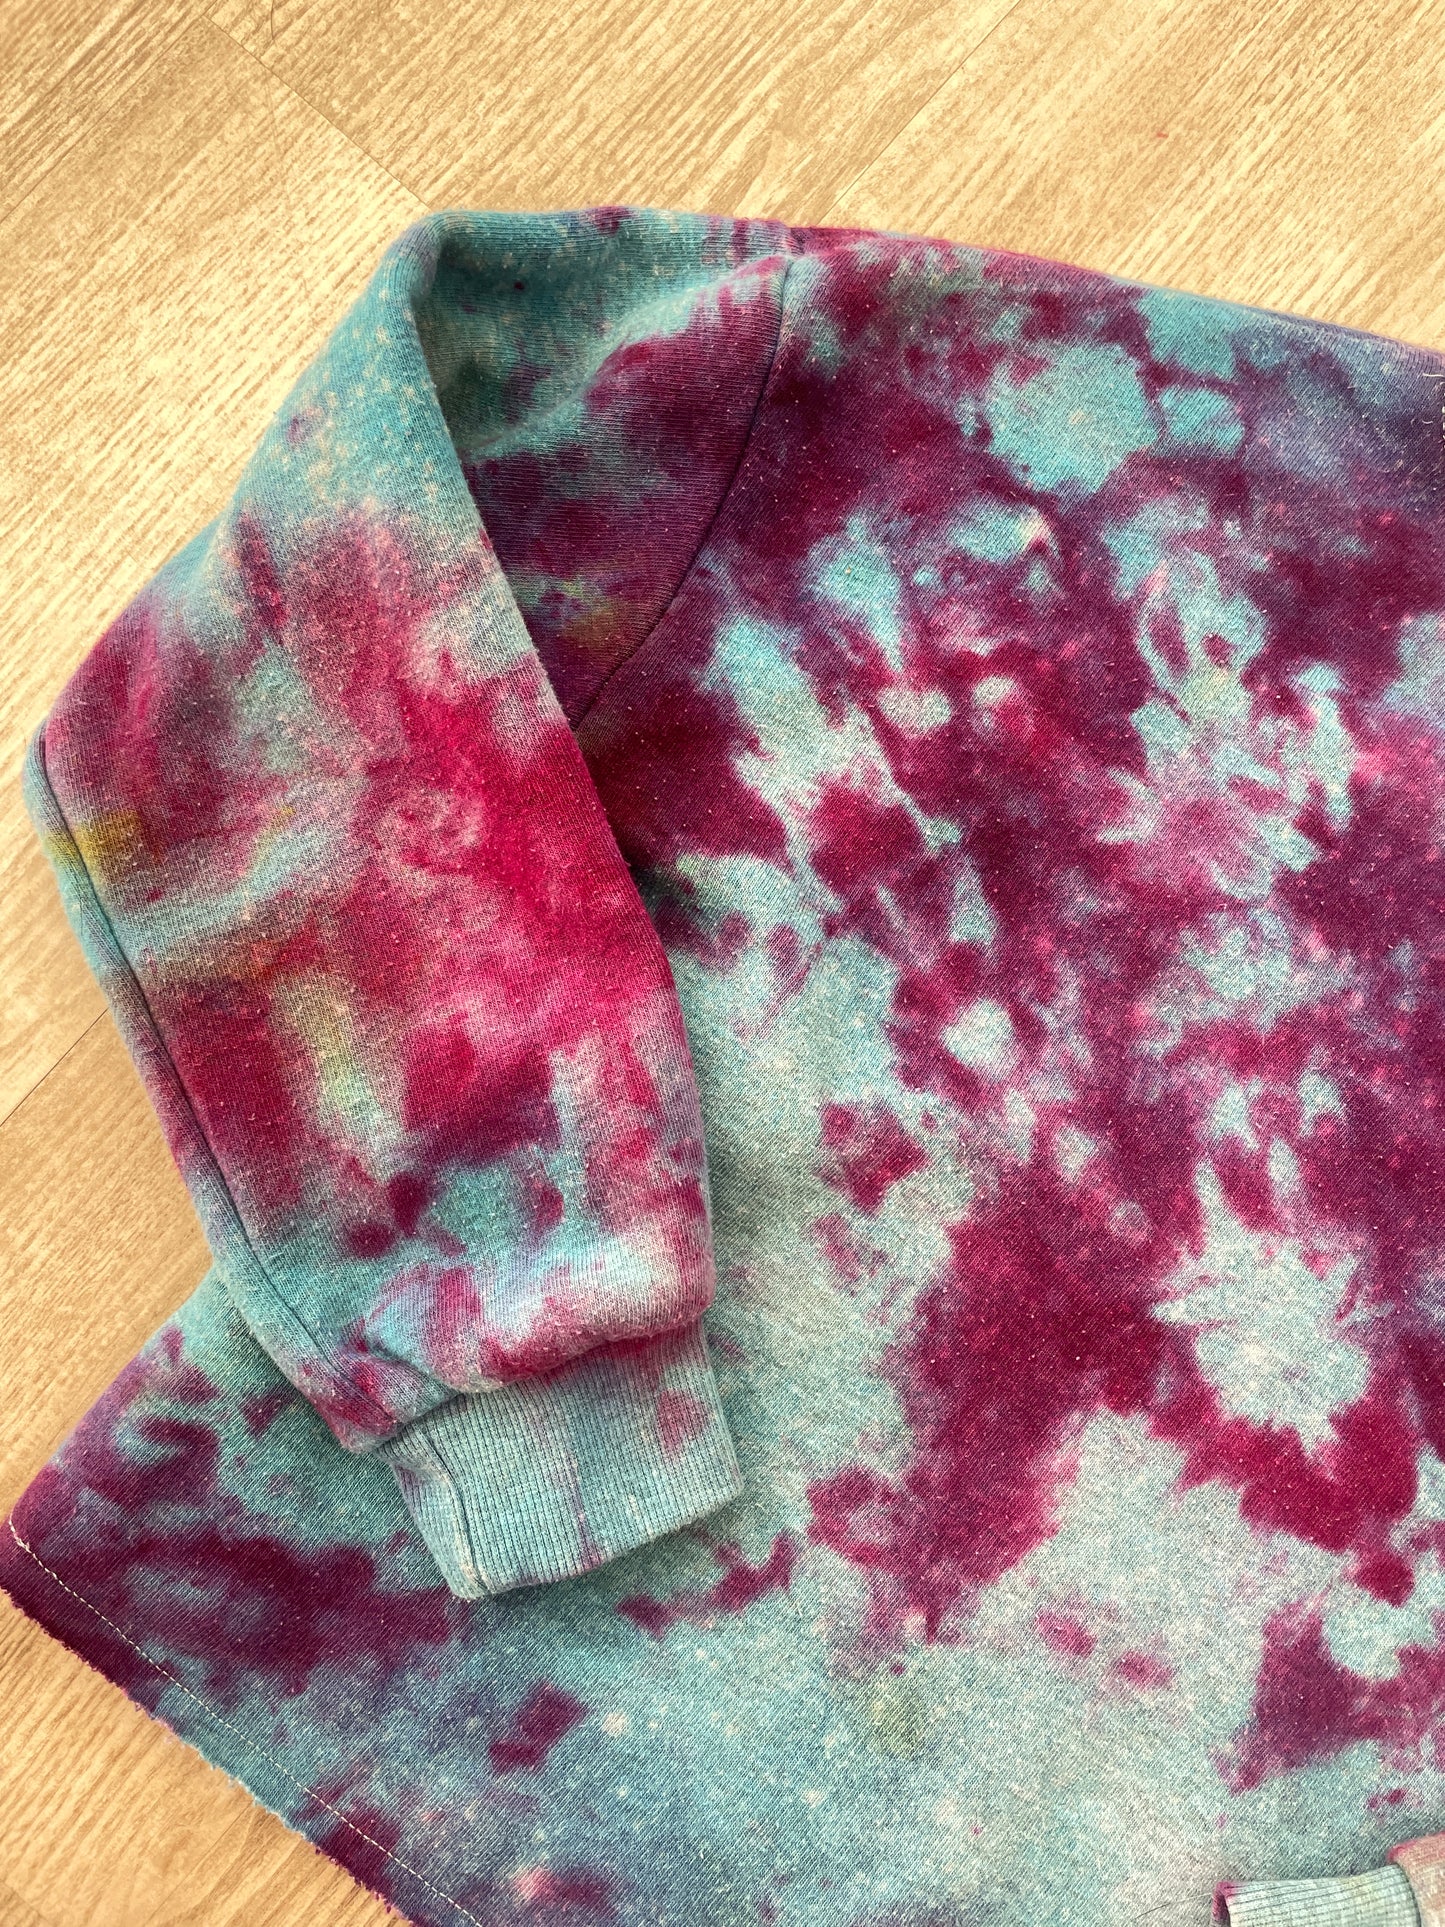 Medium Youth AC/DC Handmade Galaxy Tie Dye Cropped Length Sweatshirt | One-Of-a-Kind Upcycled Blue, Purple, and Pink Ice Dye Top